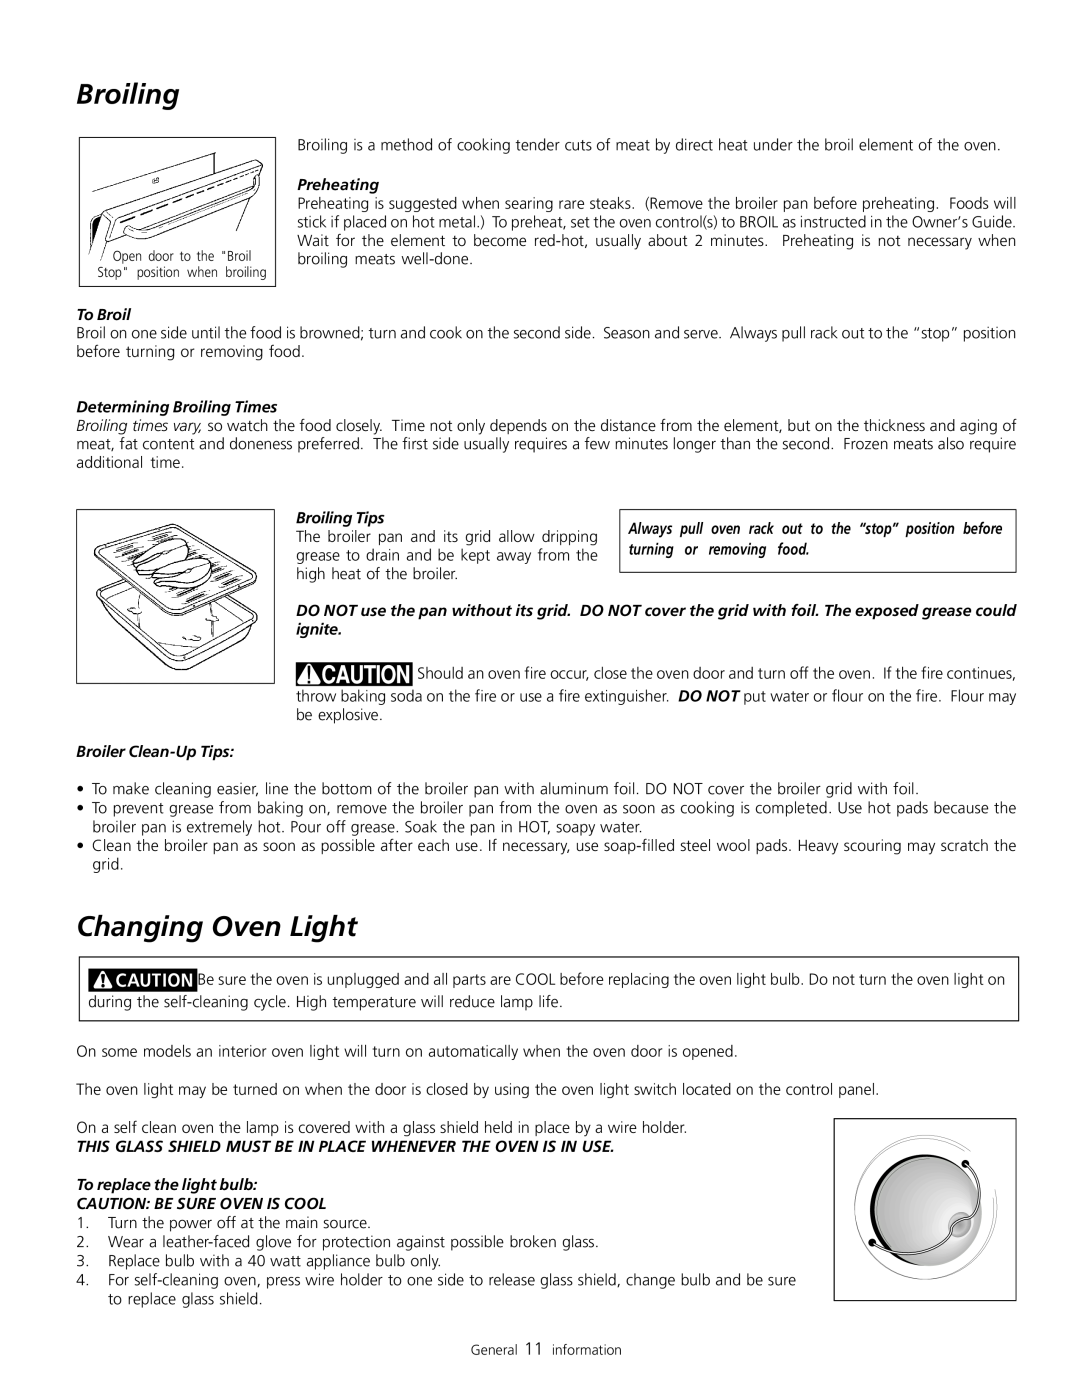 Frigidaire 318200805 warranty Changing Oven Light, Preheating, To Broil, Determining Broiling Times, Broiling Tips 